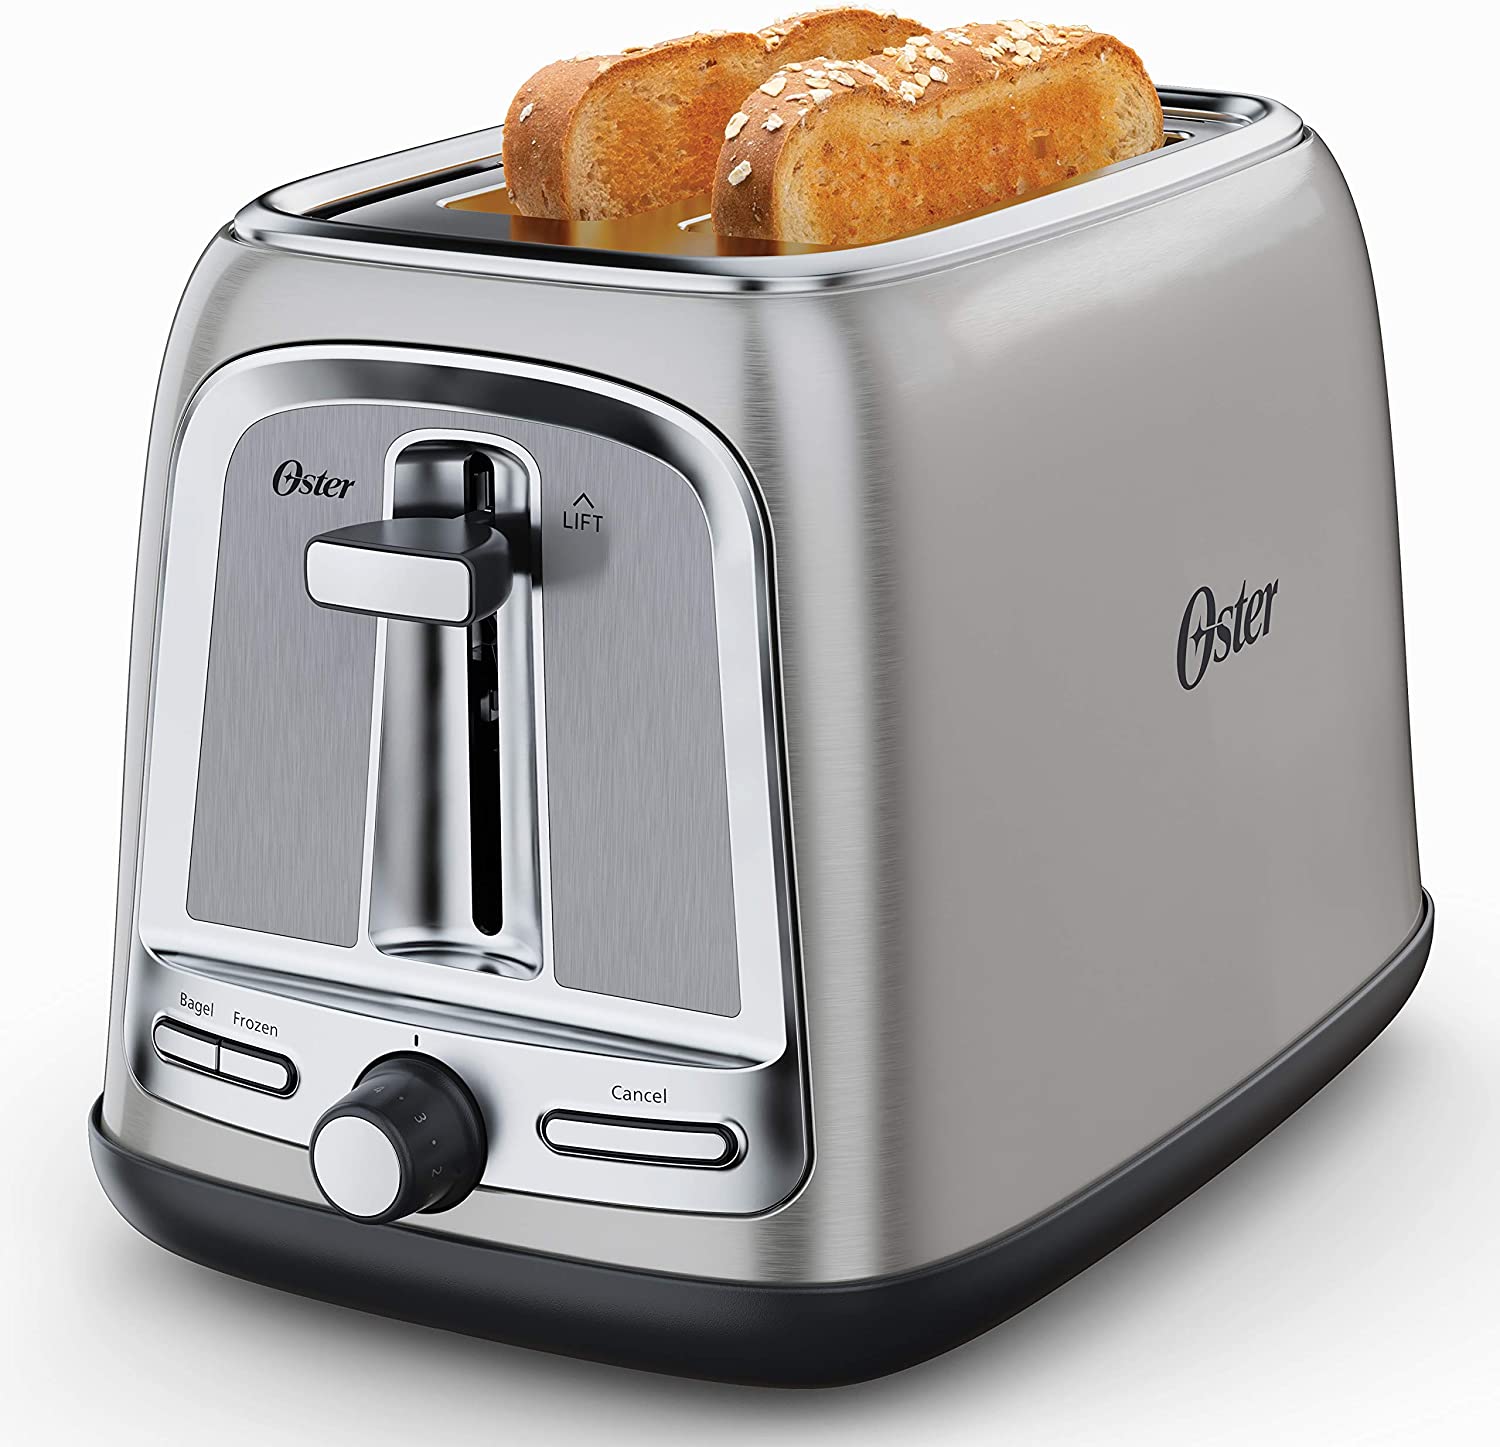 Oster 2-Slice Toaster with Advanced Toast Technology